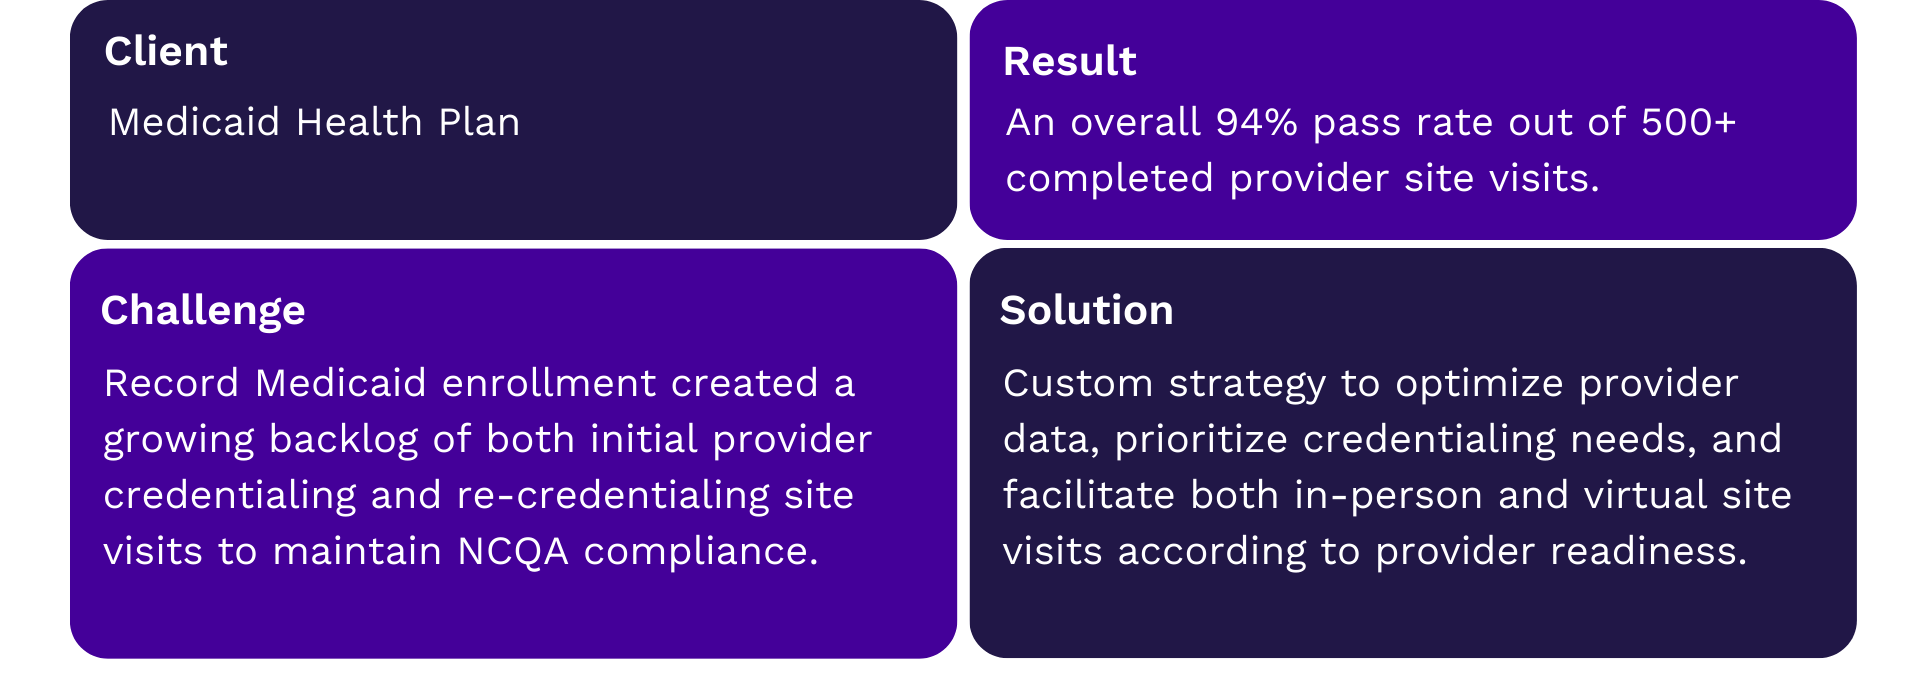 Tegria-helped-customer-optimize-provider-data-prioritize-credentialing-needs-and-faciliate-both-in-person-and-virtual-site-visits